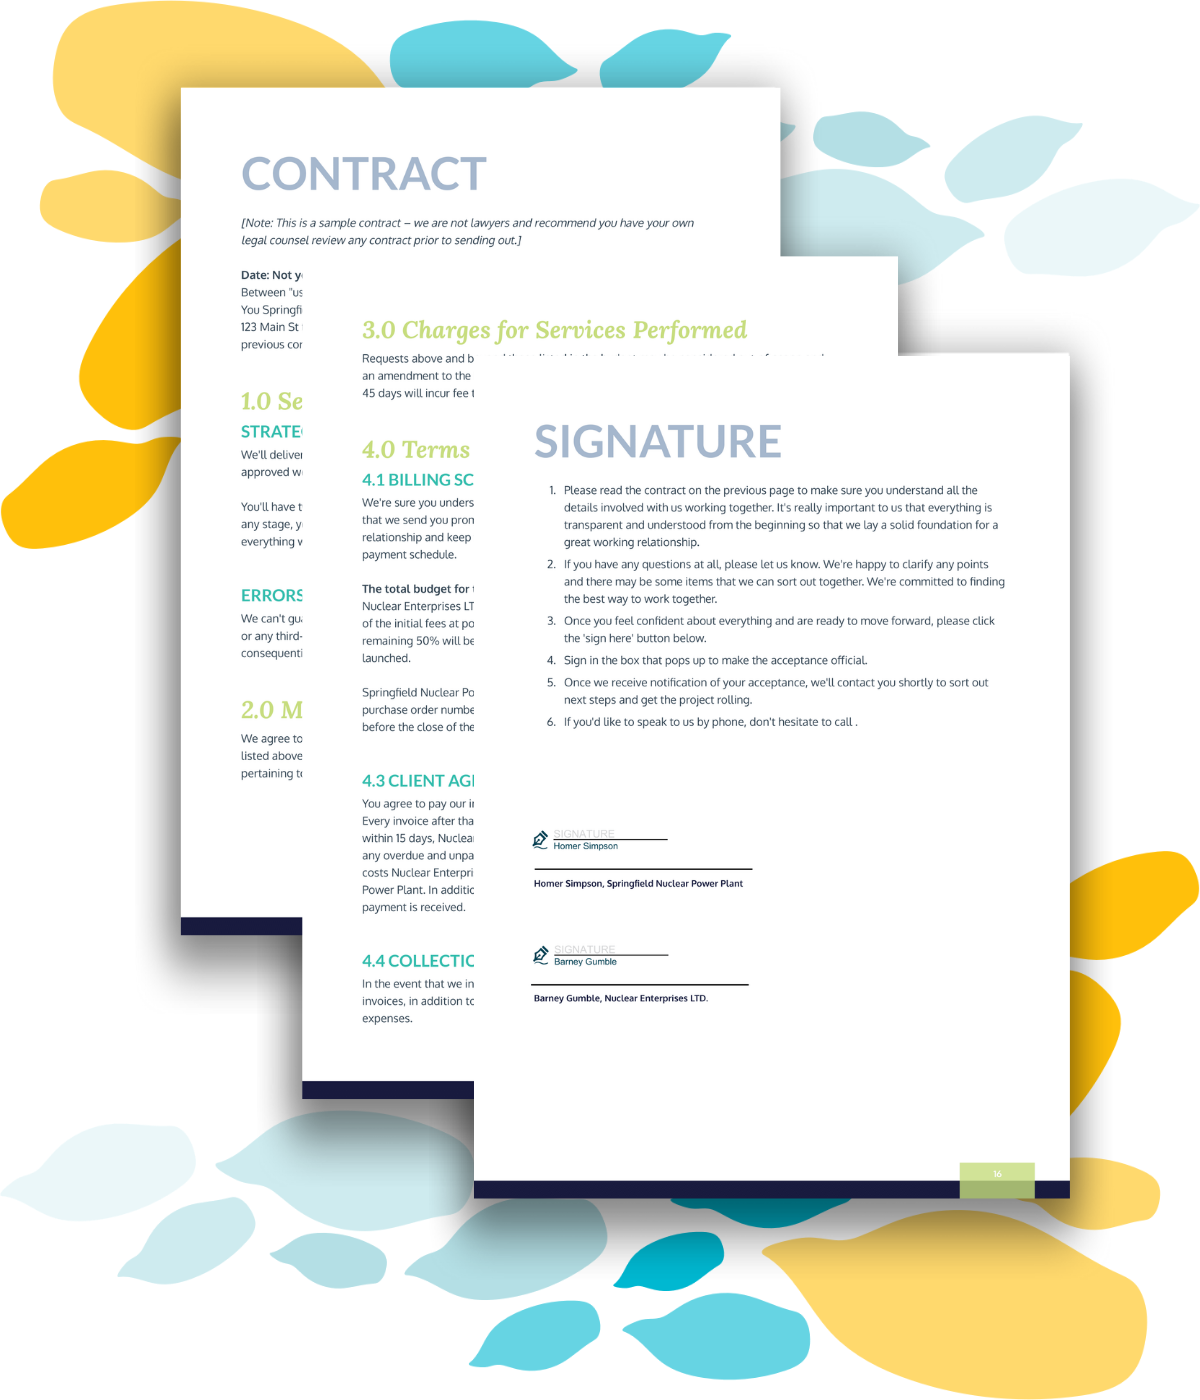 Sample contract and esignature sign-off page for a strategic marketing business proposal.